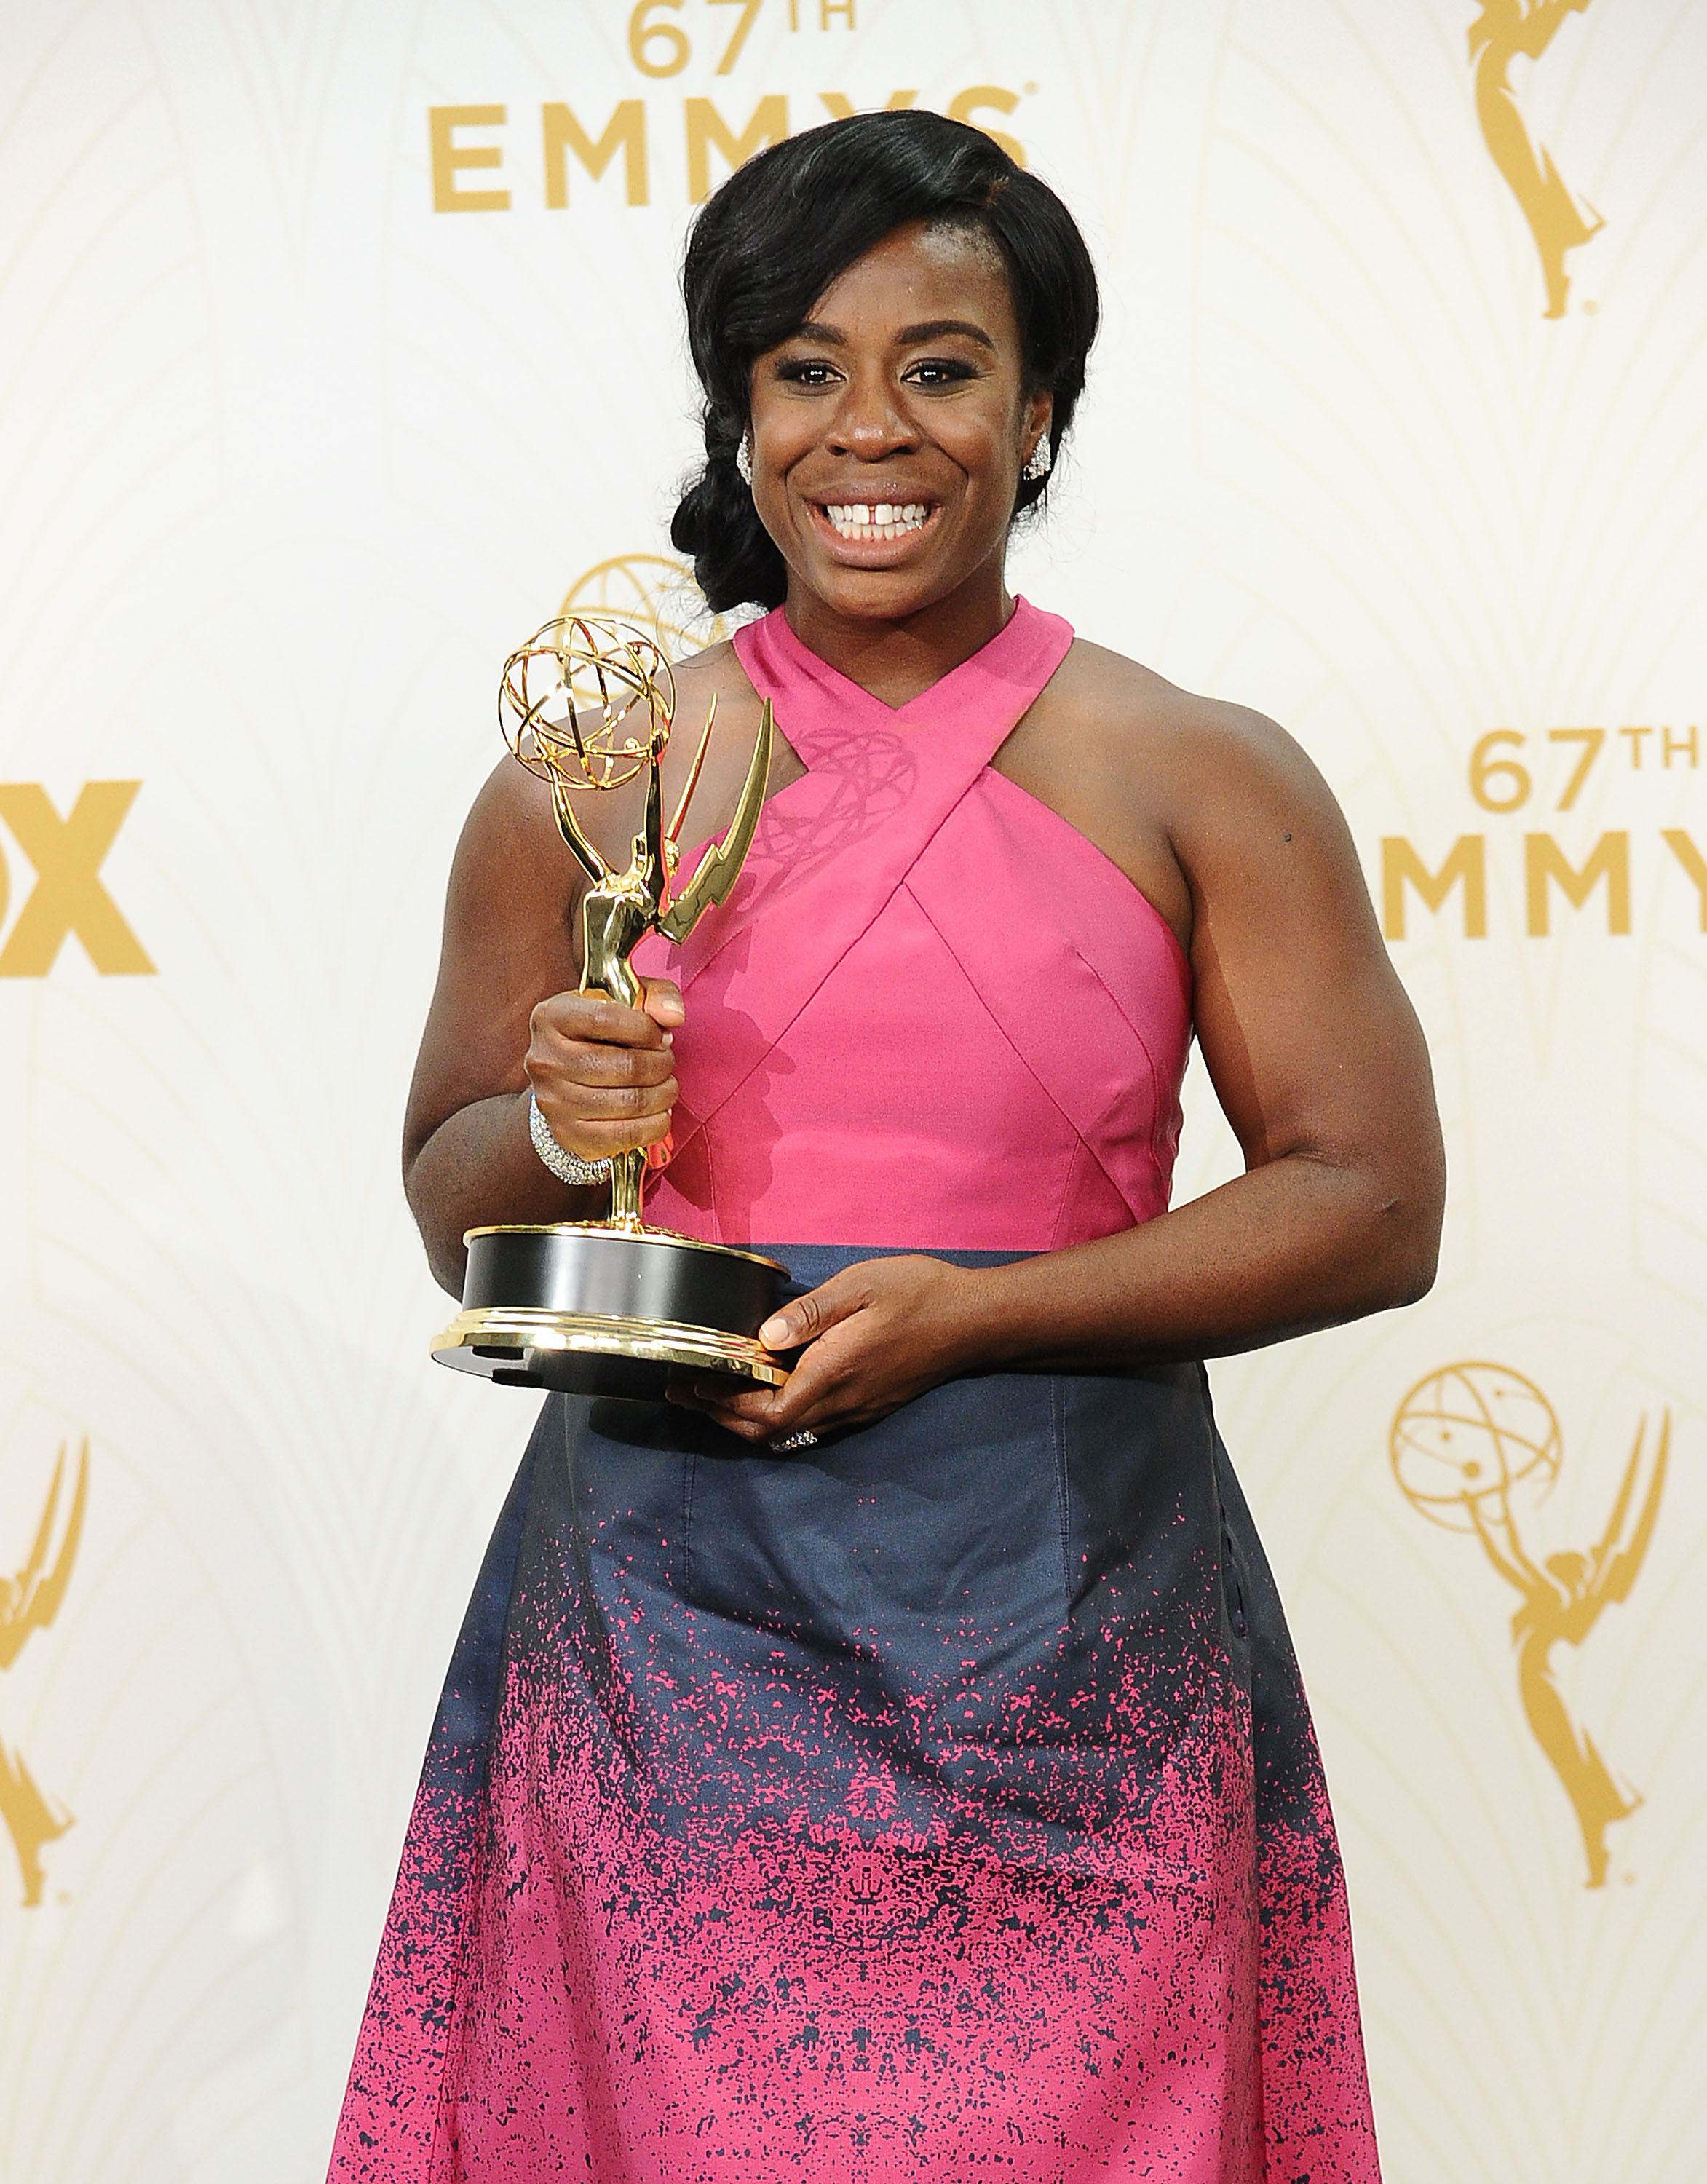 Uzo Aduba smiling and holding an Emmy award in 2015